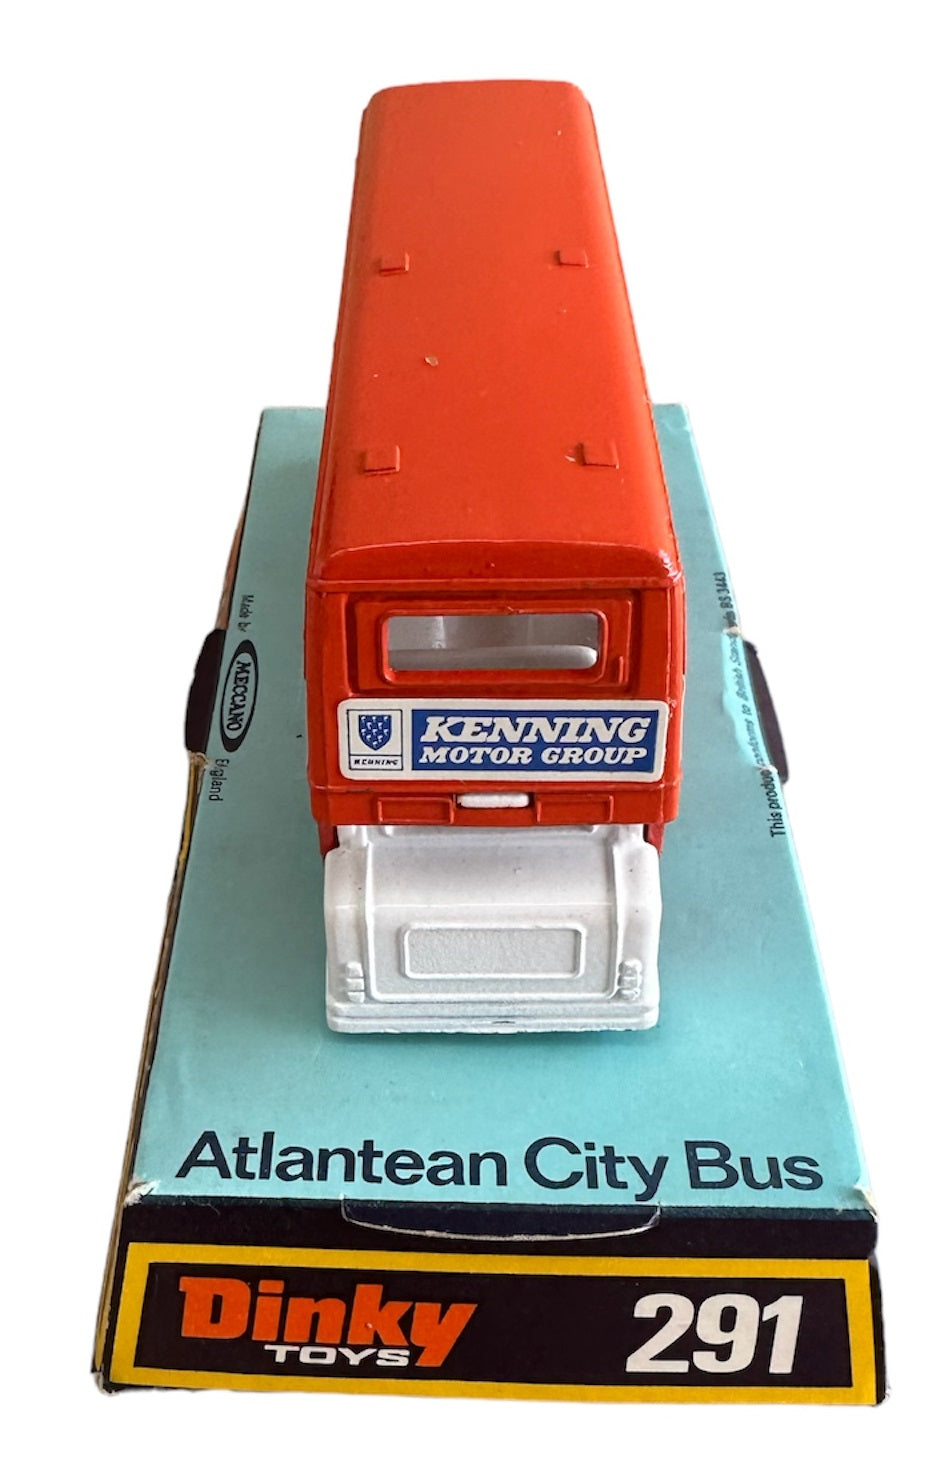 Vintage 1974 Dinky Die Cast Toys No. 291 Atlantean City Double Decker Bus 1/43 Scale Replica Vehicle In The Original Packaging - Shop Stock Room Find